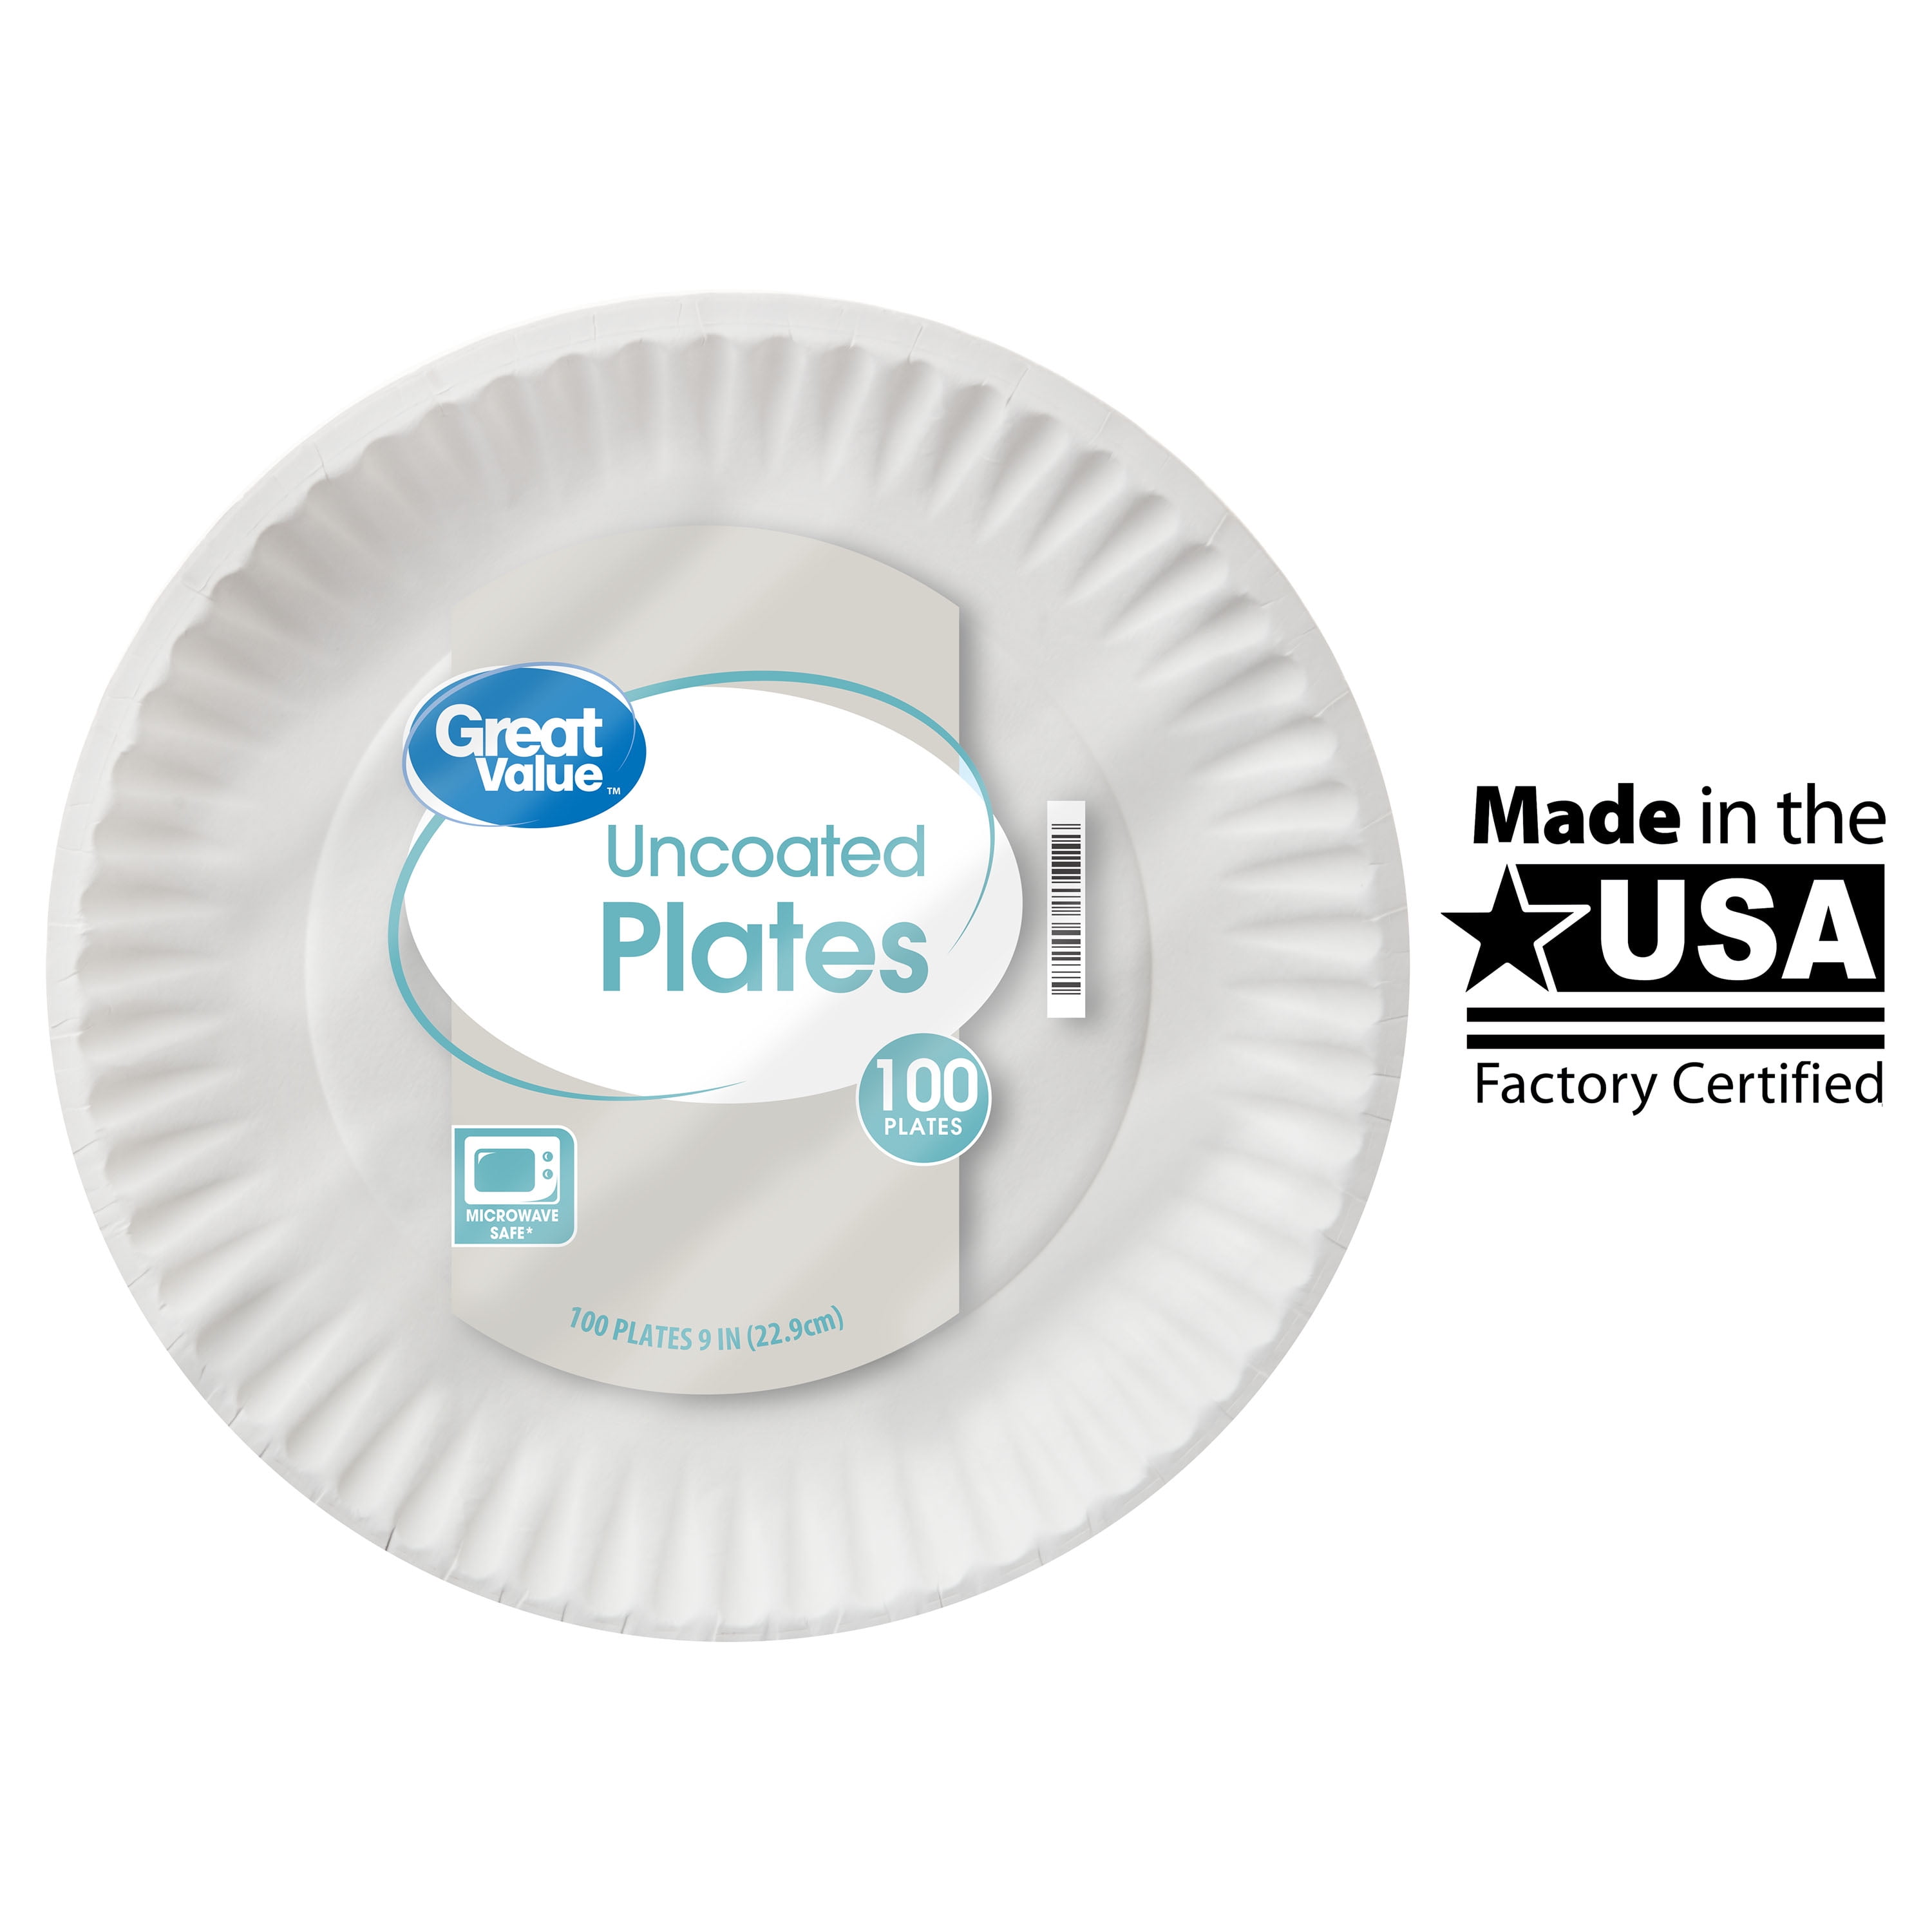 Smile & Save 9 Microwave Safe Paper Plates - 64 ct